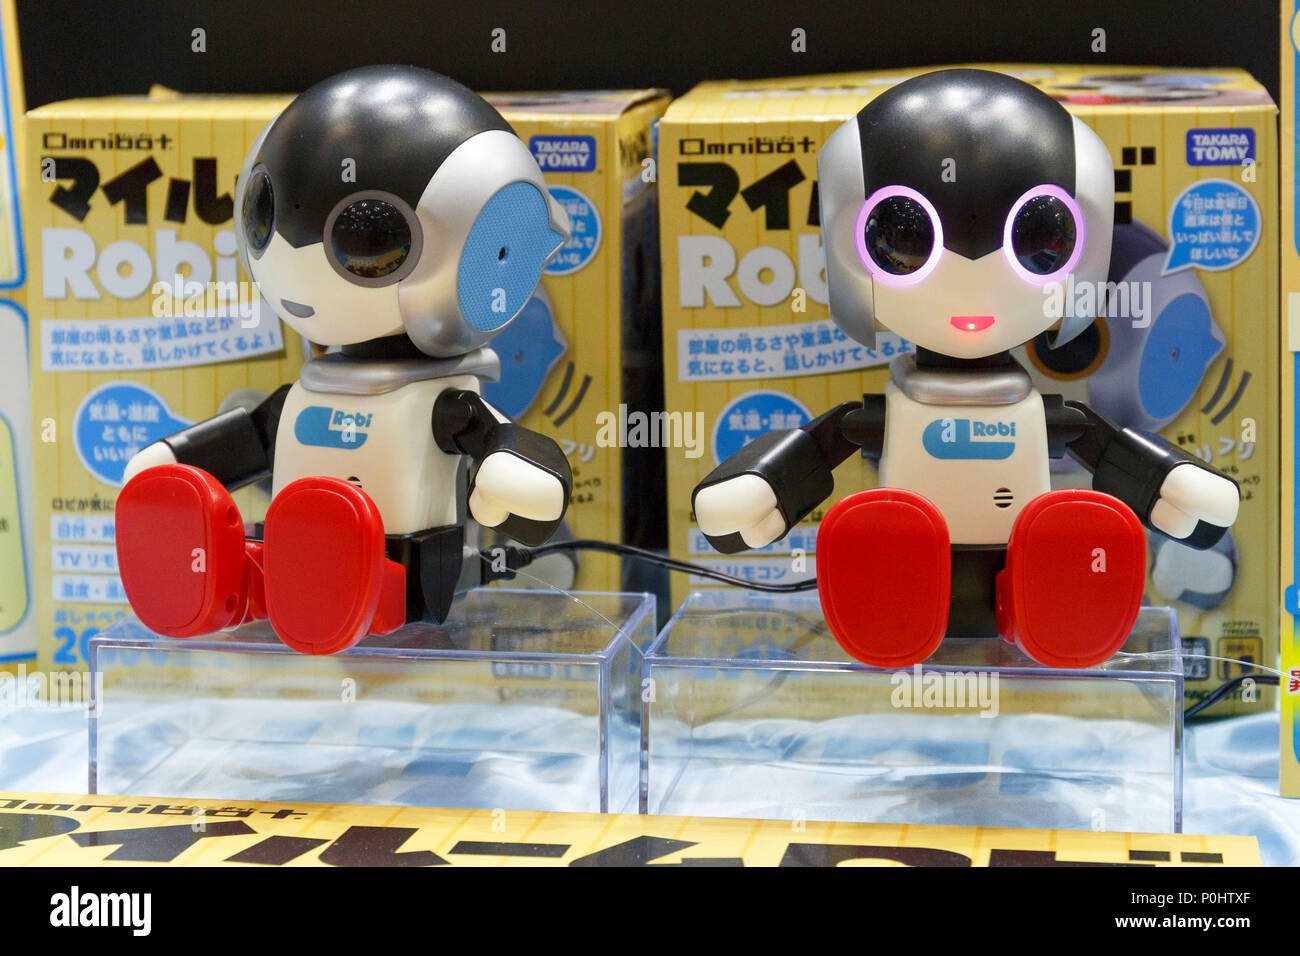 Tokyo, Japan, 9 June 2018. My Room Robi robots on display during the  International Tokyo Toy Show 2018 in Tokyo Big Sight on June 9, 2018,  Tokyo, Japan. Japan's biggest exhibition for